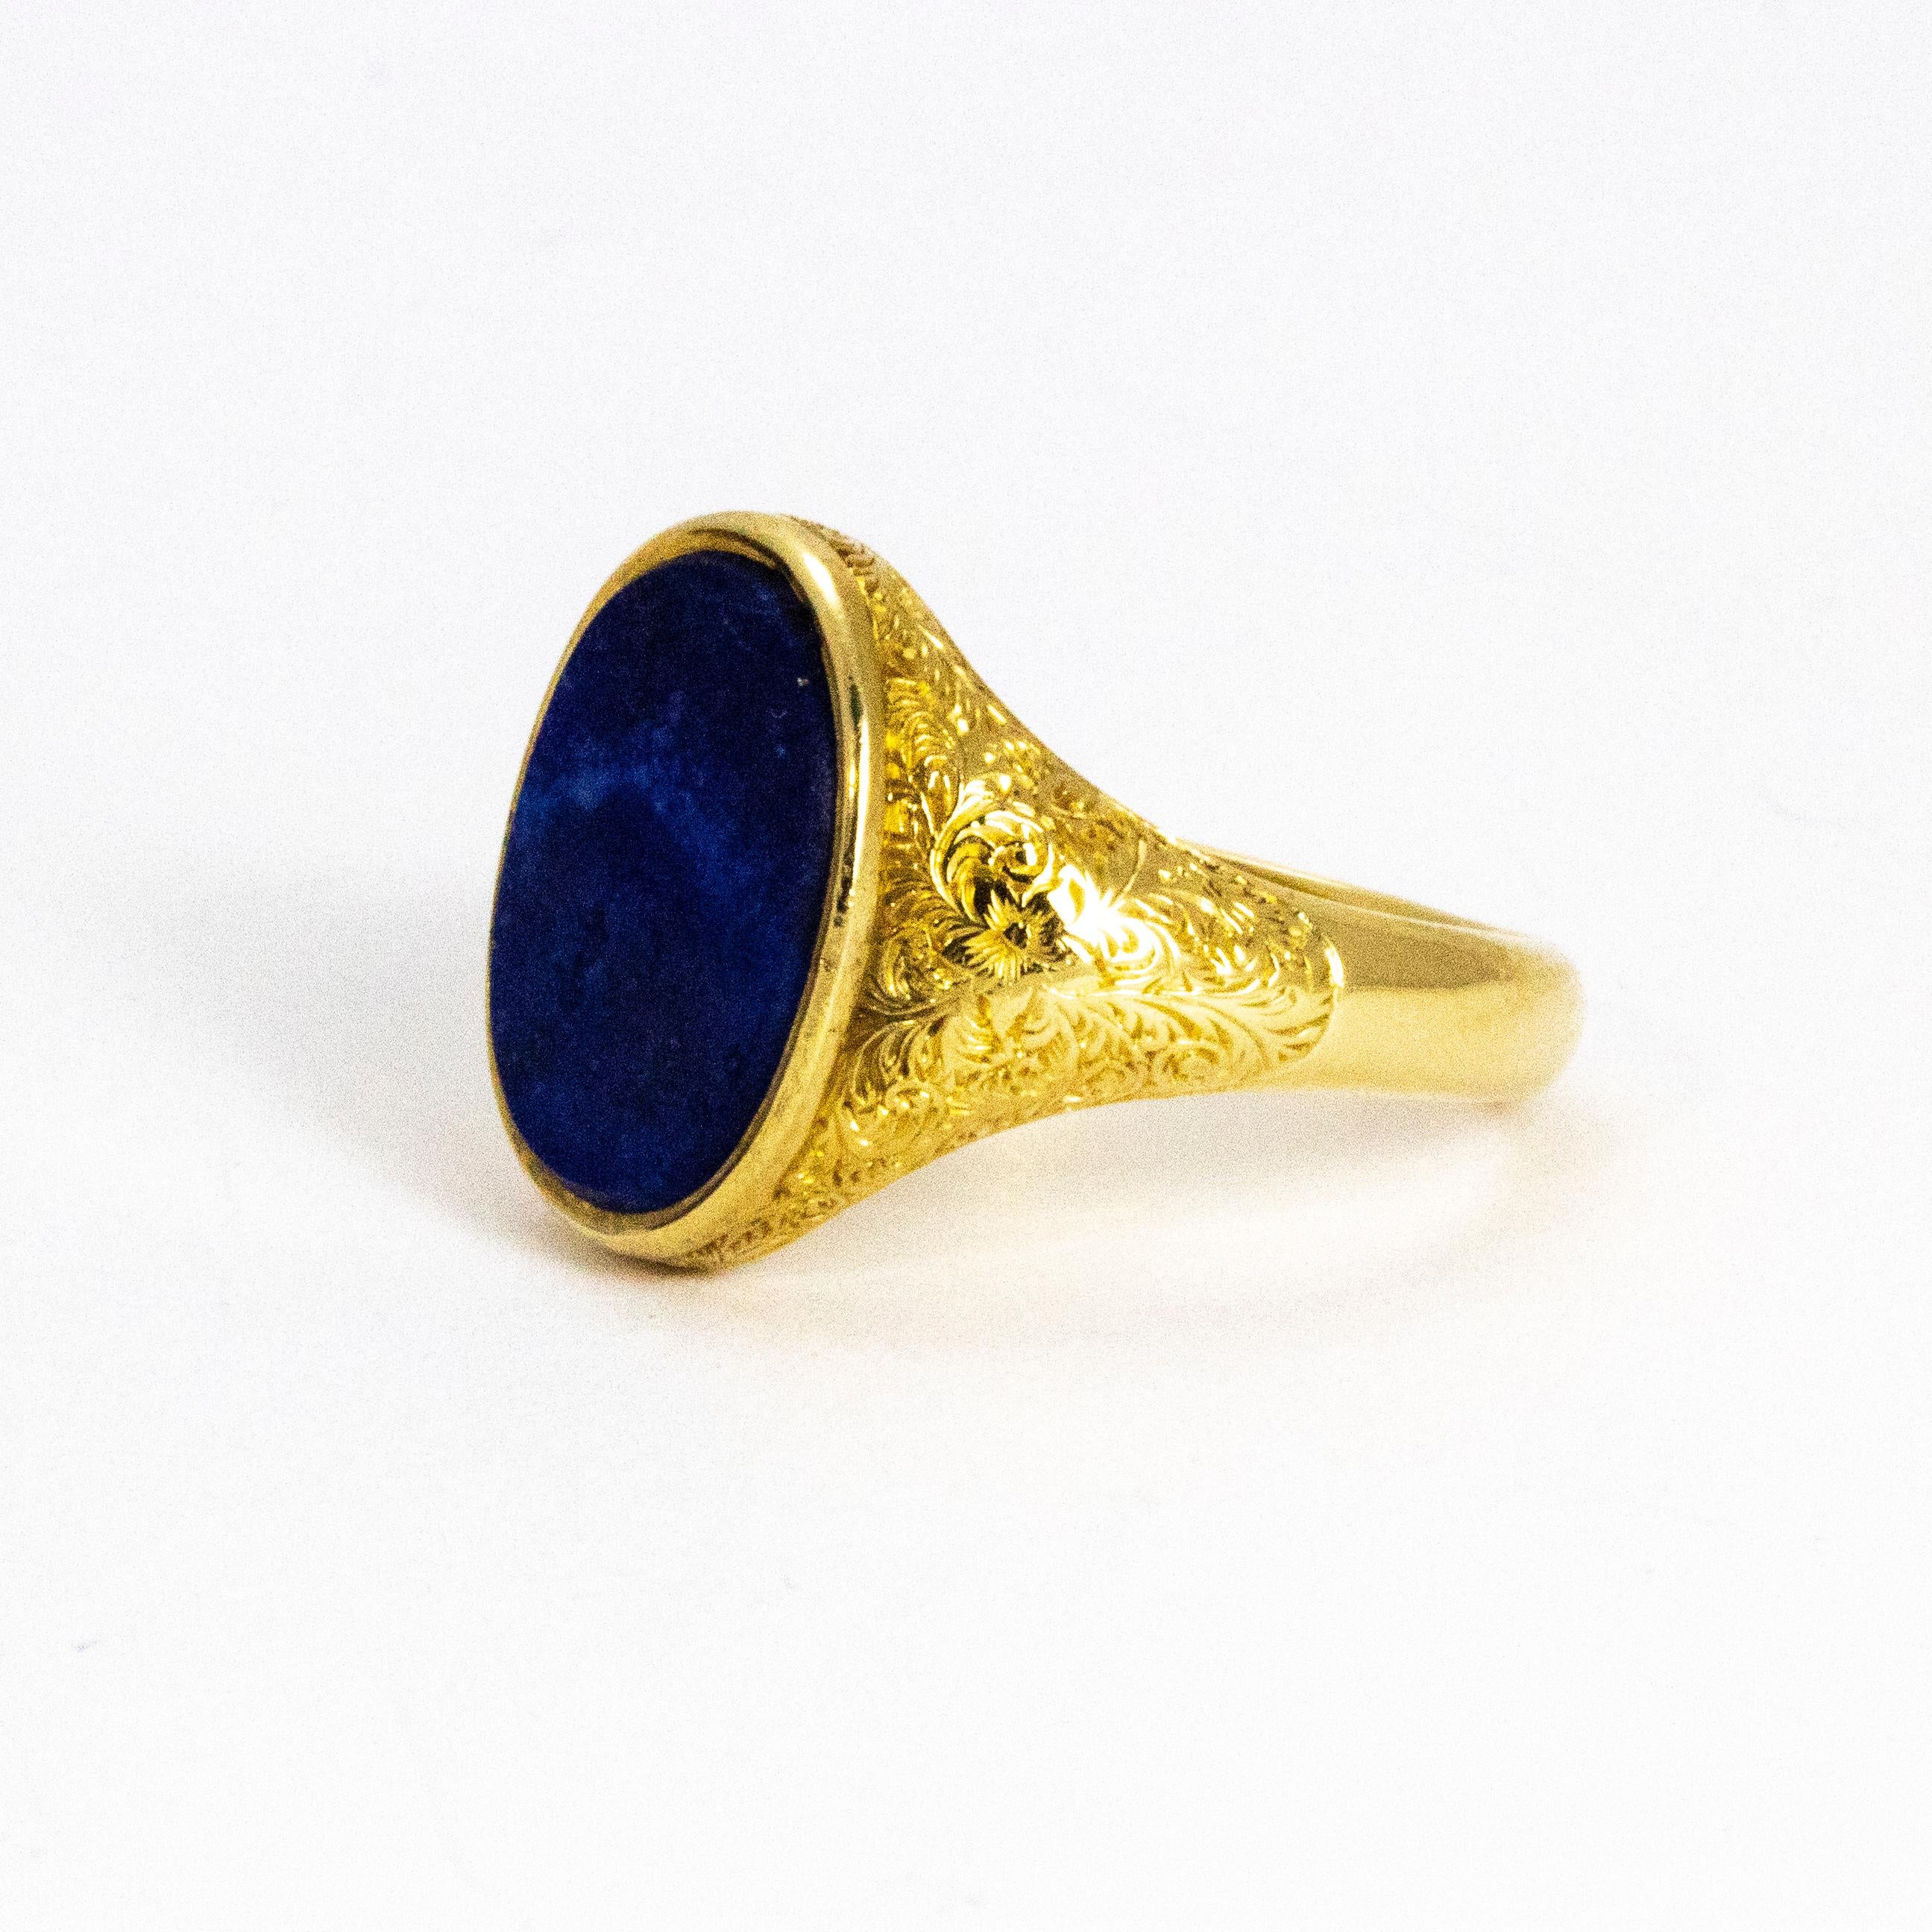 A stunning antique Victorian signet ring set with a beautifully coloured flat cut lapis. The surroundings of the stone and shoulders are wonderfully detailed with ornate foliate motifs. Modelled in 18 karat yellow gold.

Ring Size: L or 6